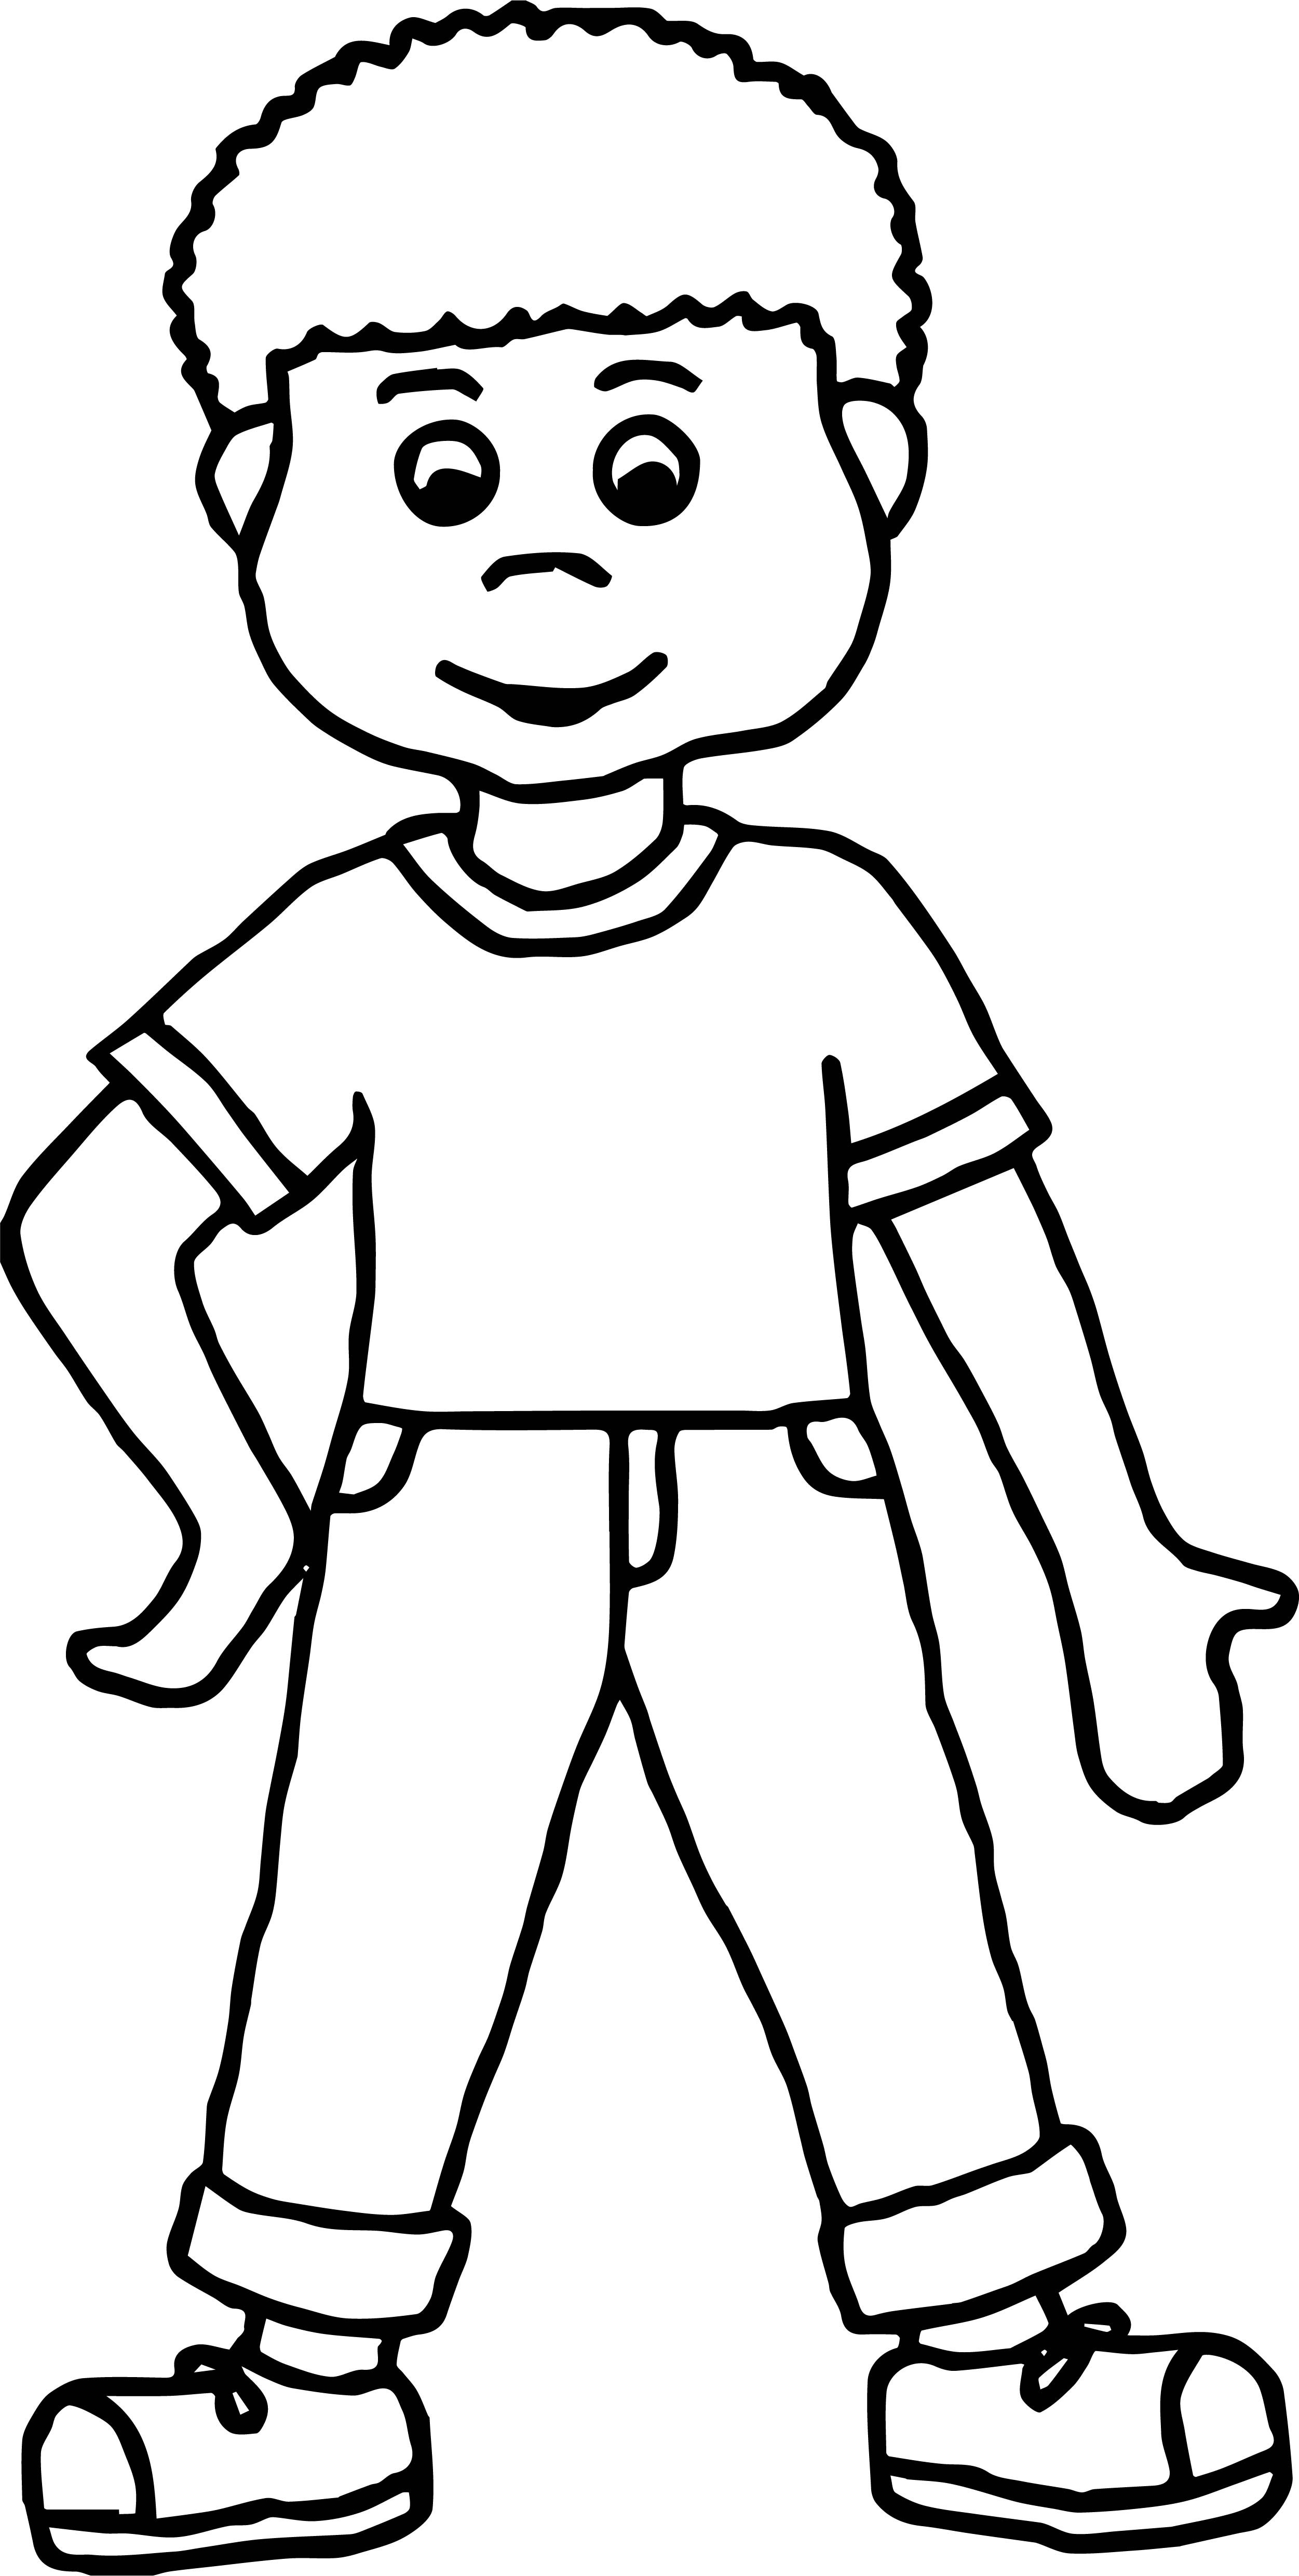 Coloring Pages Boys
 Boy Front View Coloring Page